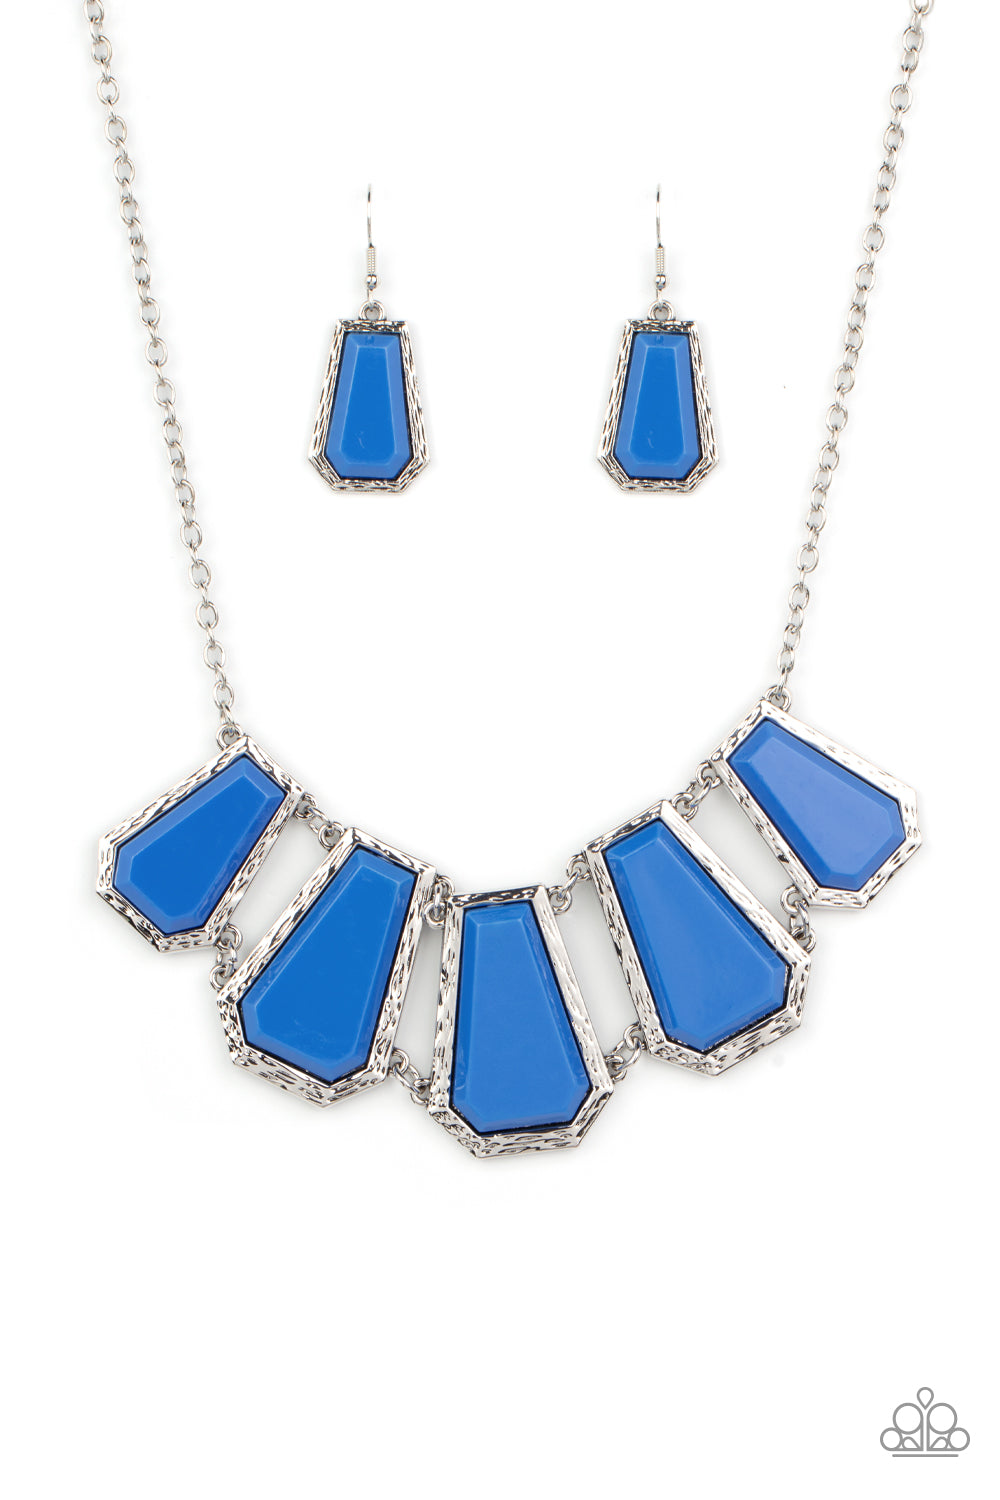 Stellar Heiress Blue Necklace - Paparazzi Accessories  Encased in hammered silver fittings, trapezoidal blue acrylic frames delicately fan out below the collar for a dramatic pop of color. Features an adjustable clasp closure.  Sold as one individual necklace. Includes one pair of matching earrings.